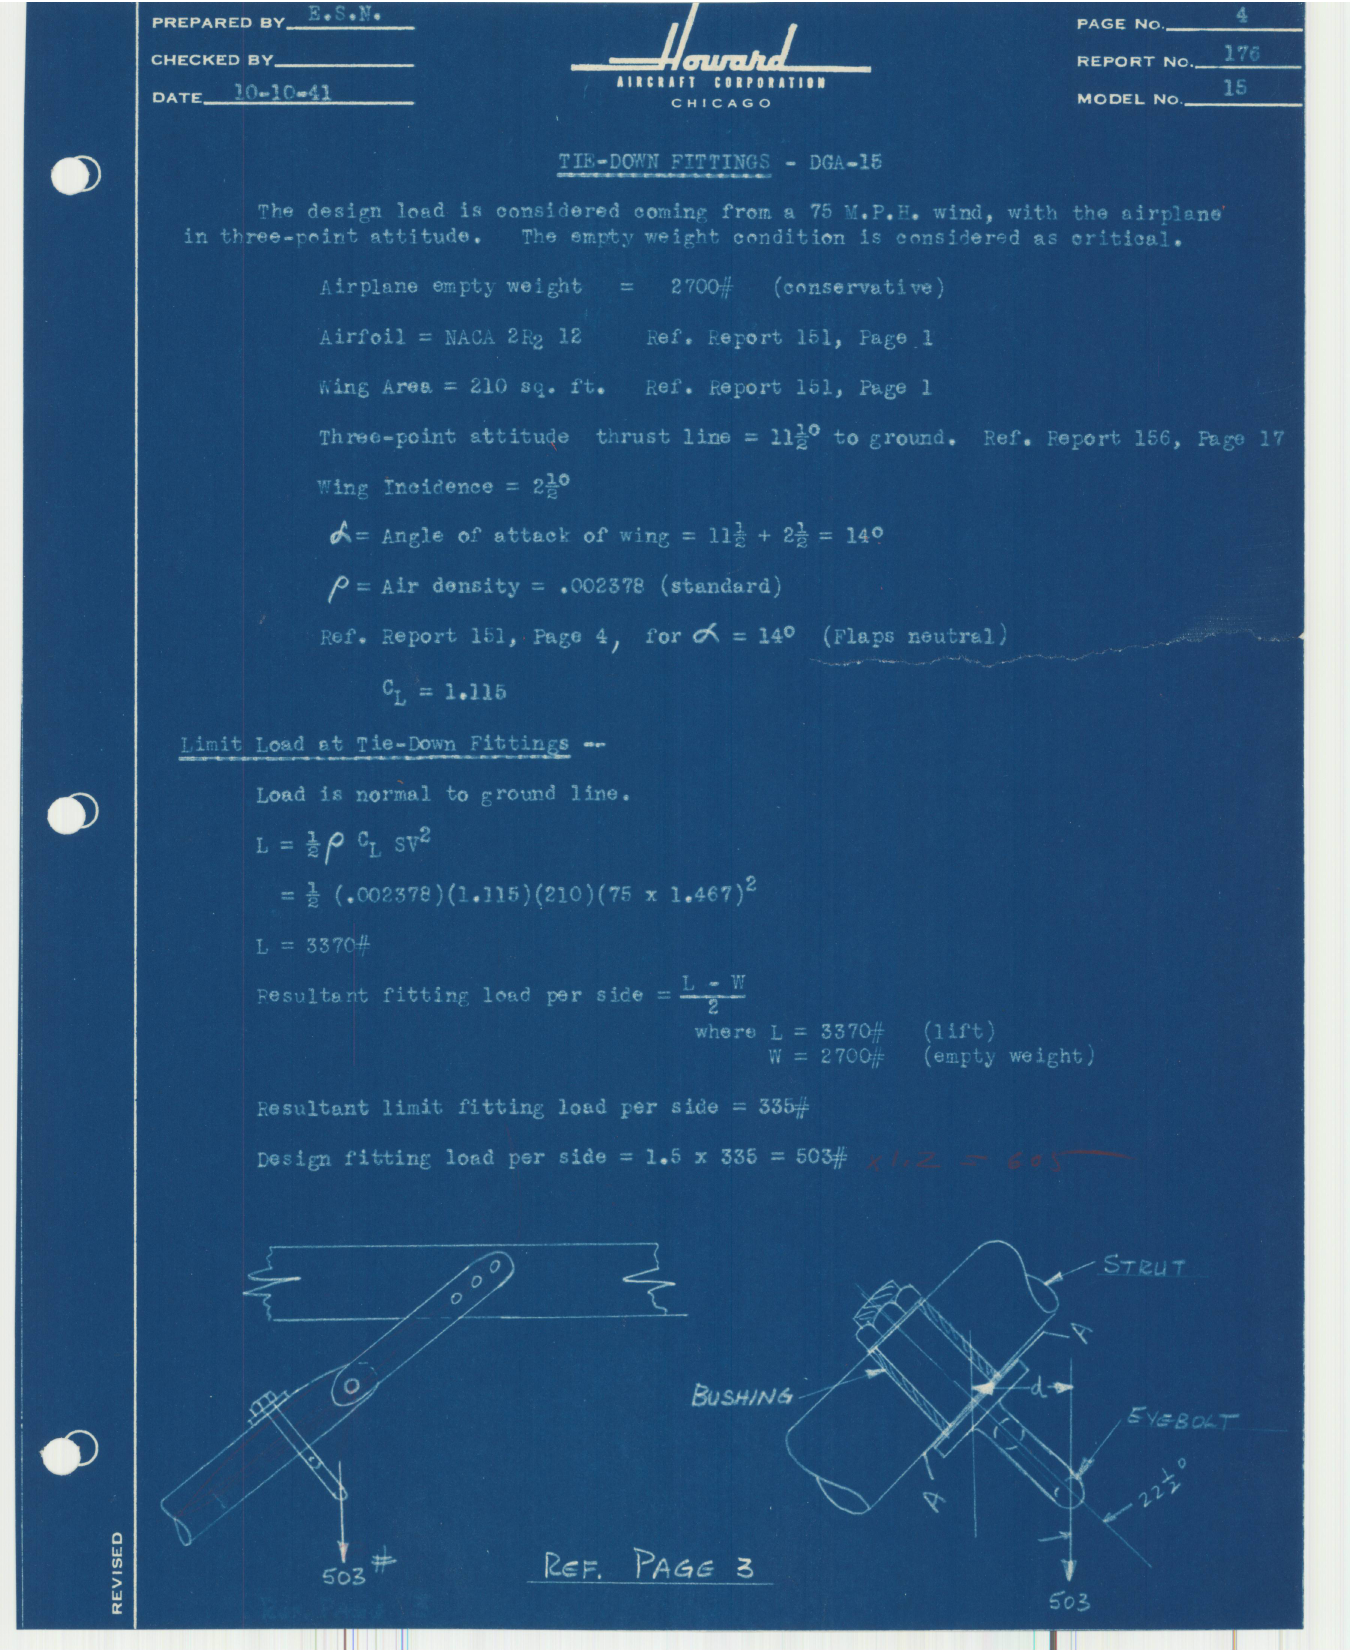 Sample page 4 from AirCorps Library document: Report 176, Tie-Down Attachment Fitting, DGA-15